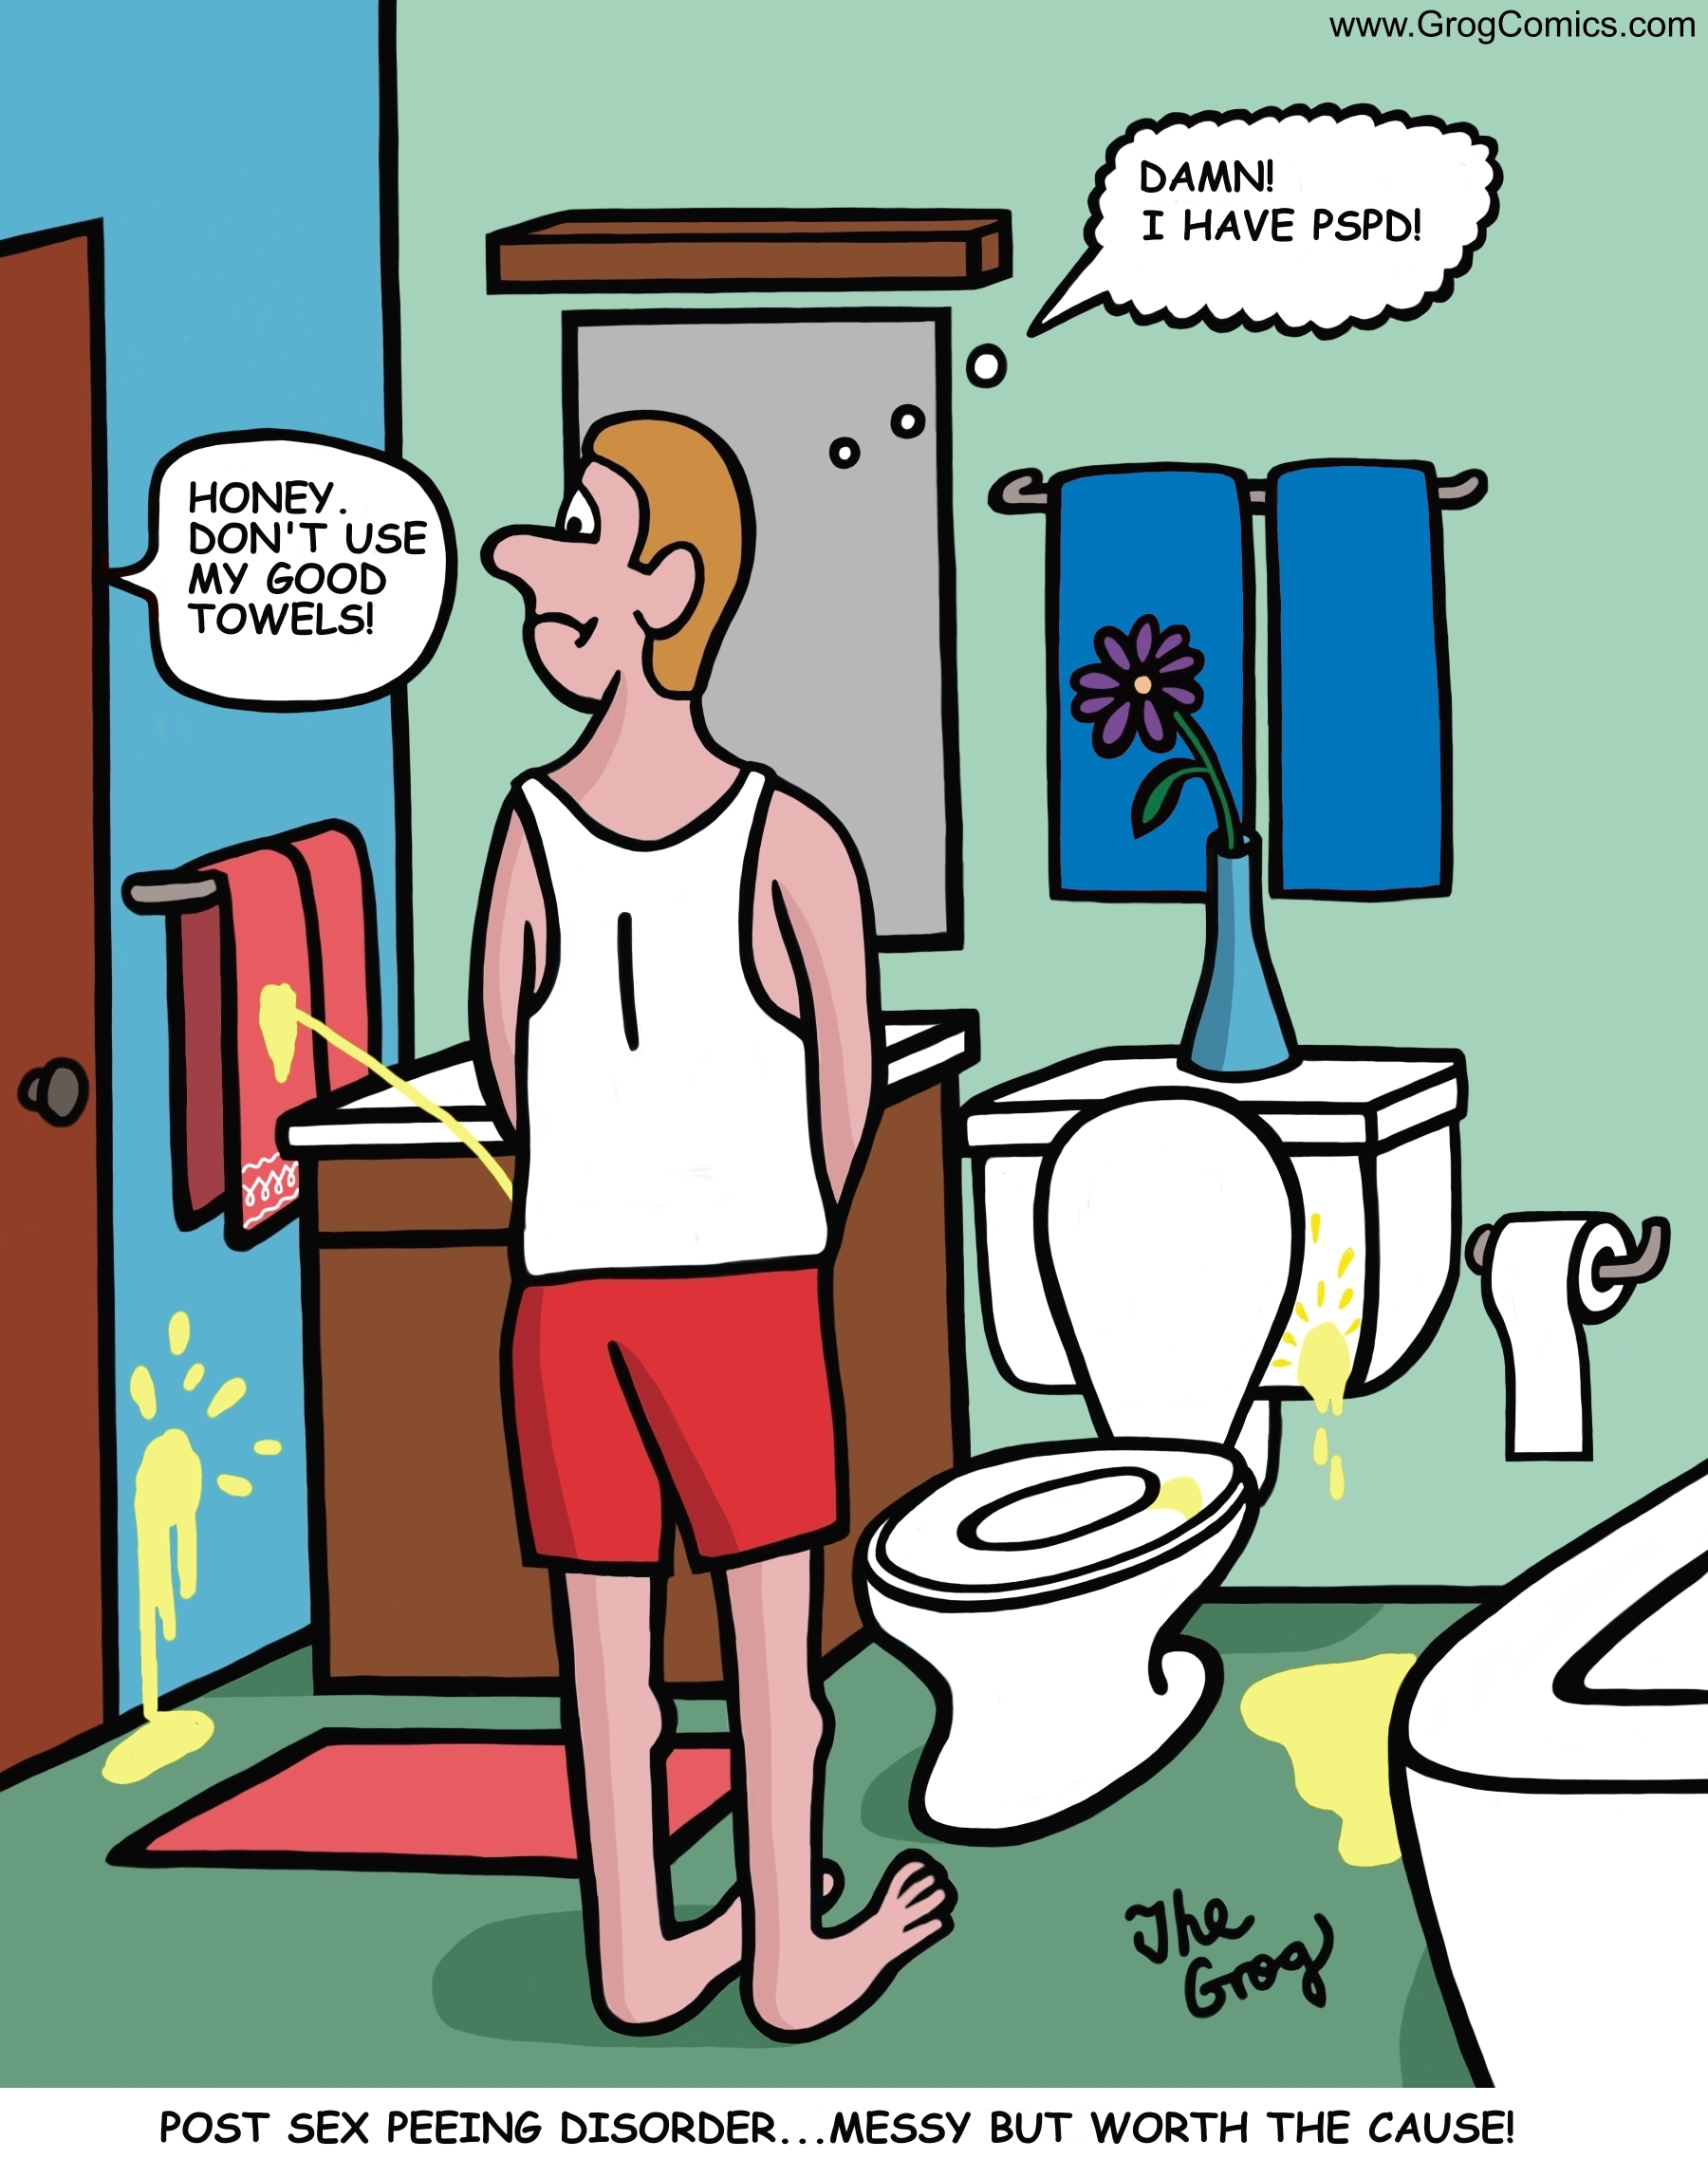 A man is peeing in the bathroom. Behind the closed door, he hears his wife say, “Honey, don’t use my good towels.” The man pees all over the floor, the toilet lid, and the good towels”. He says to himself, “Damn, I have P.S.P.D, Post Sex Peeing Disorder.”